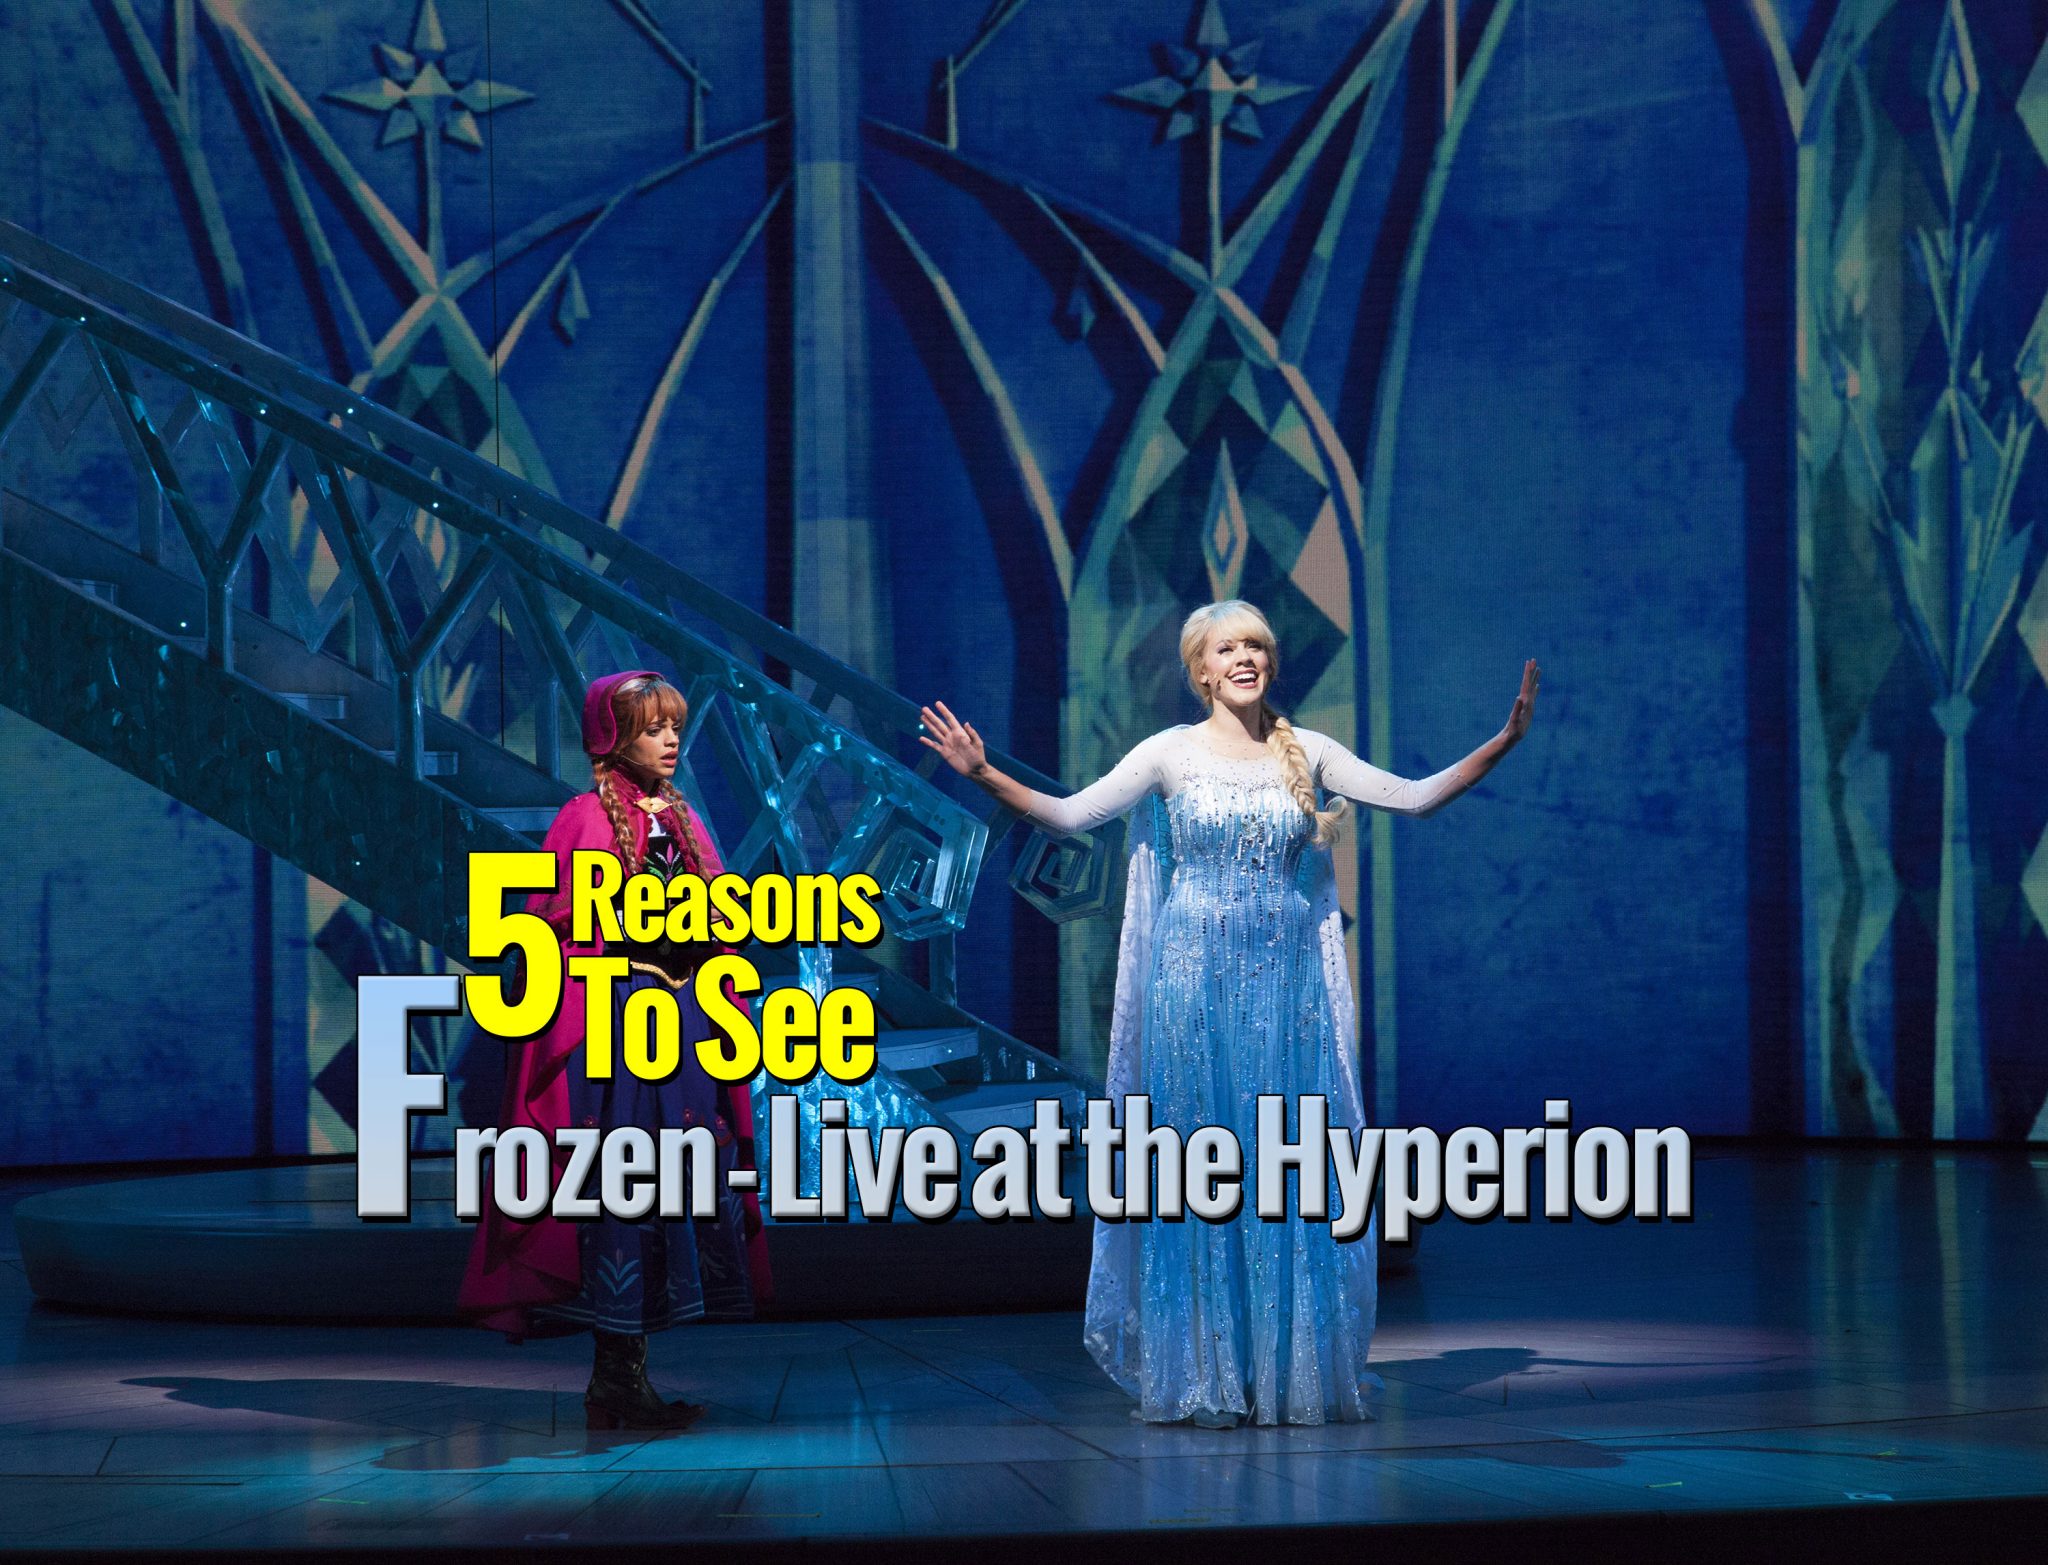 5 Reasons to See Frozen – Live at the Hyperion